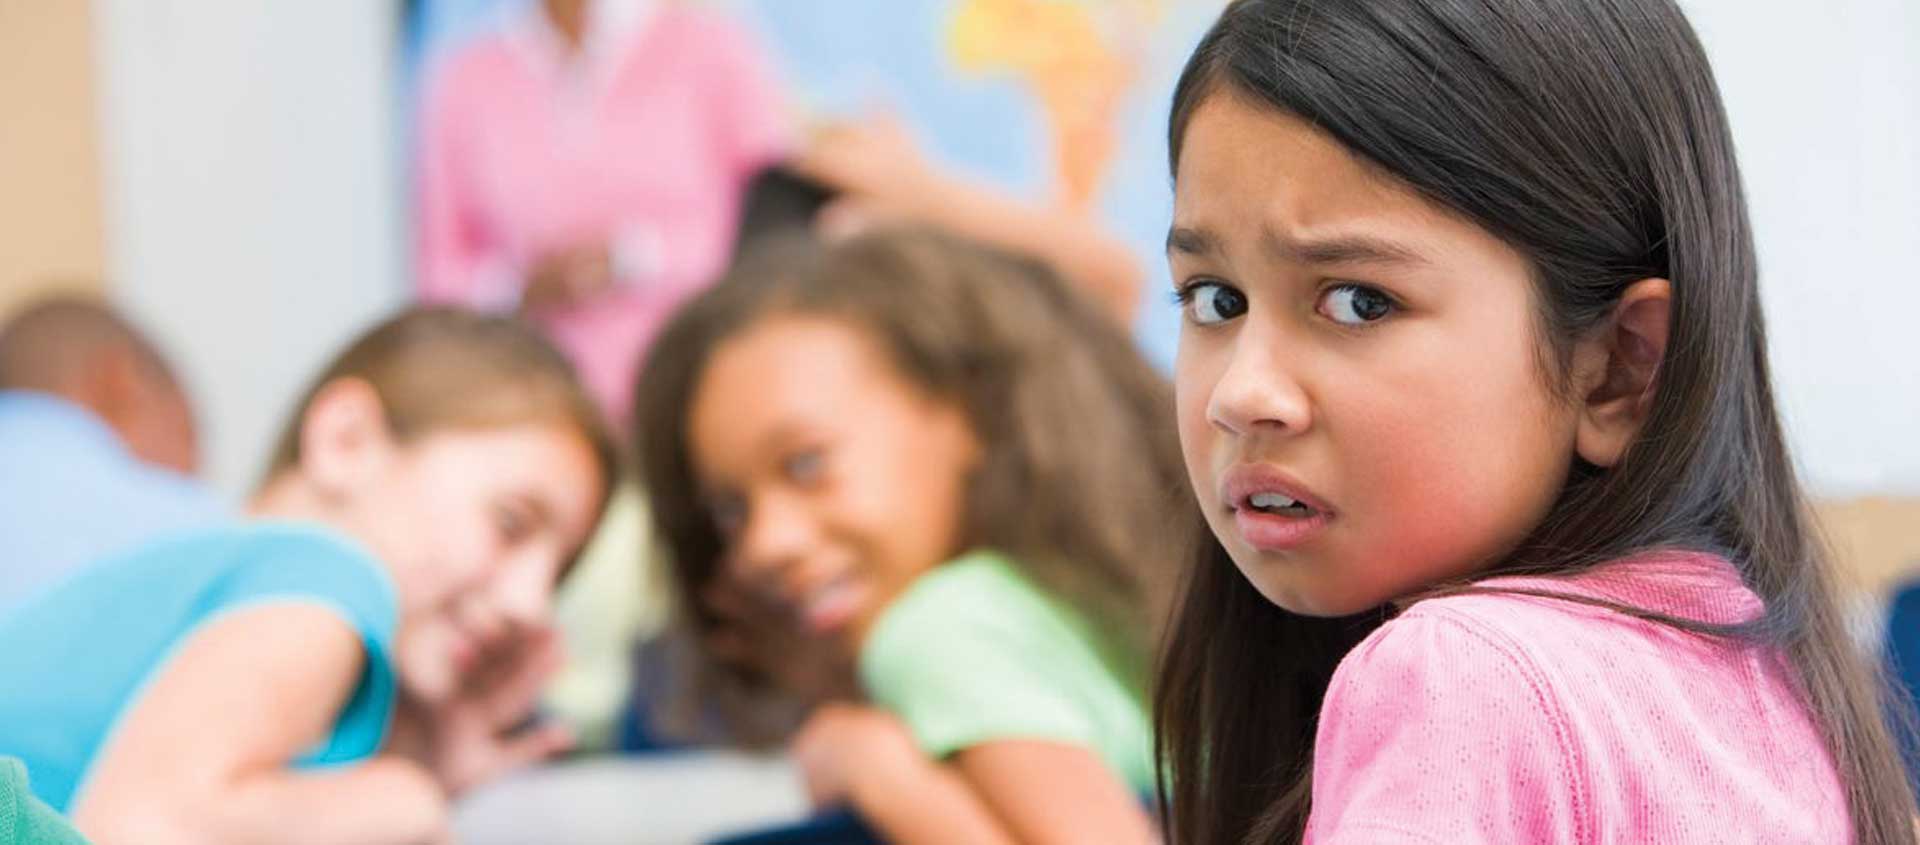 An elementary age girl looks upset while two classmates whisper behind her.